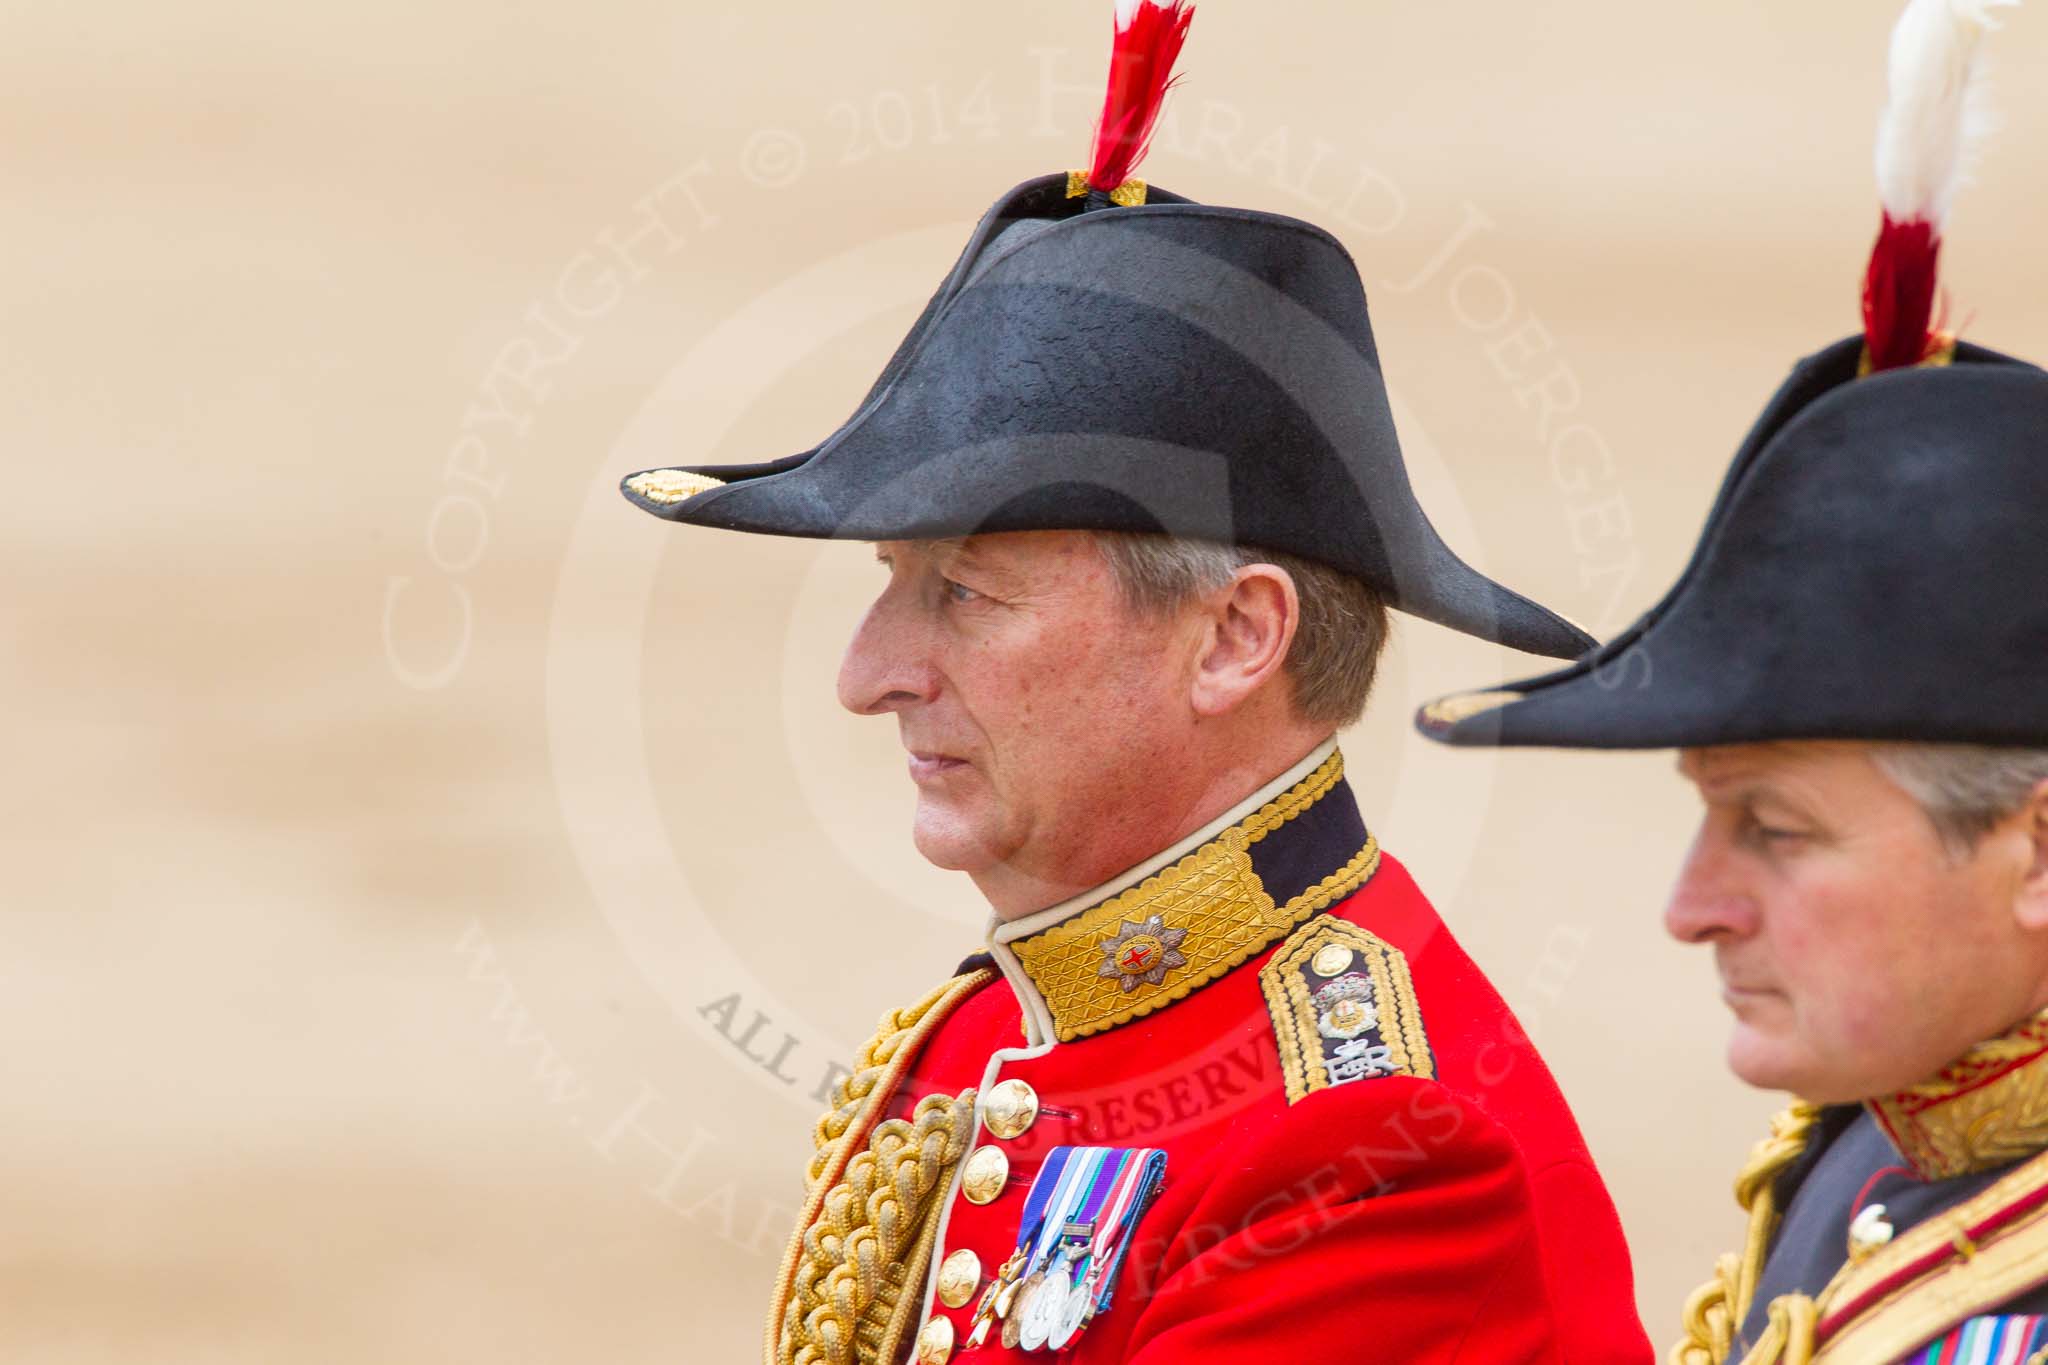 Trooping the Colour 2014.
Horse Guards Parade, Westminster,
London SW1A,

United Kingdom,
on 14 June 2014 at 12:13, image #897